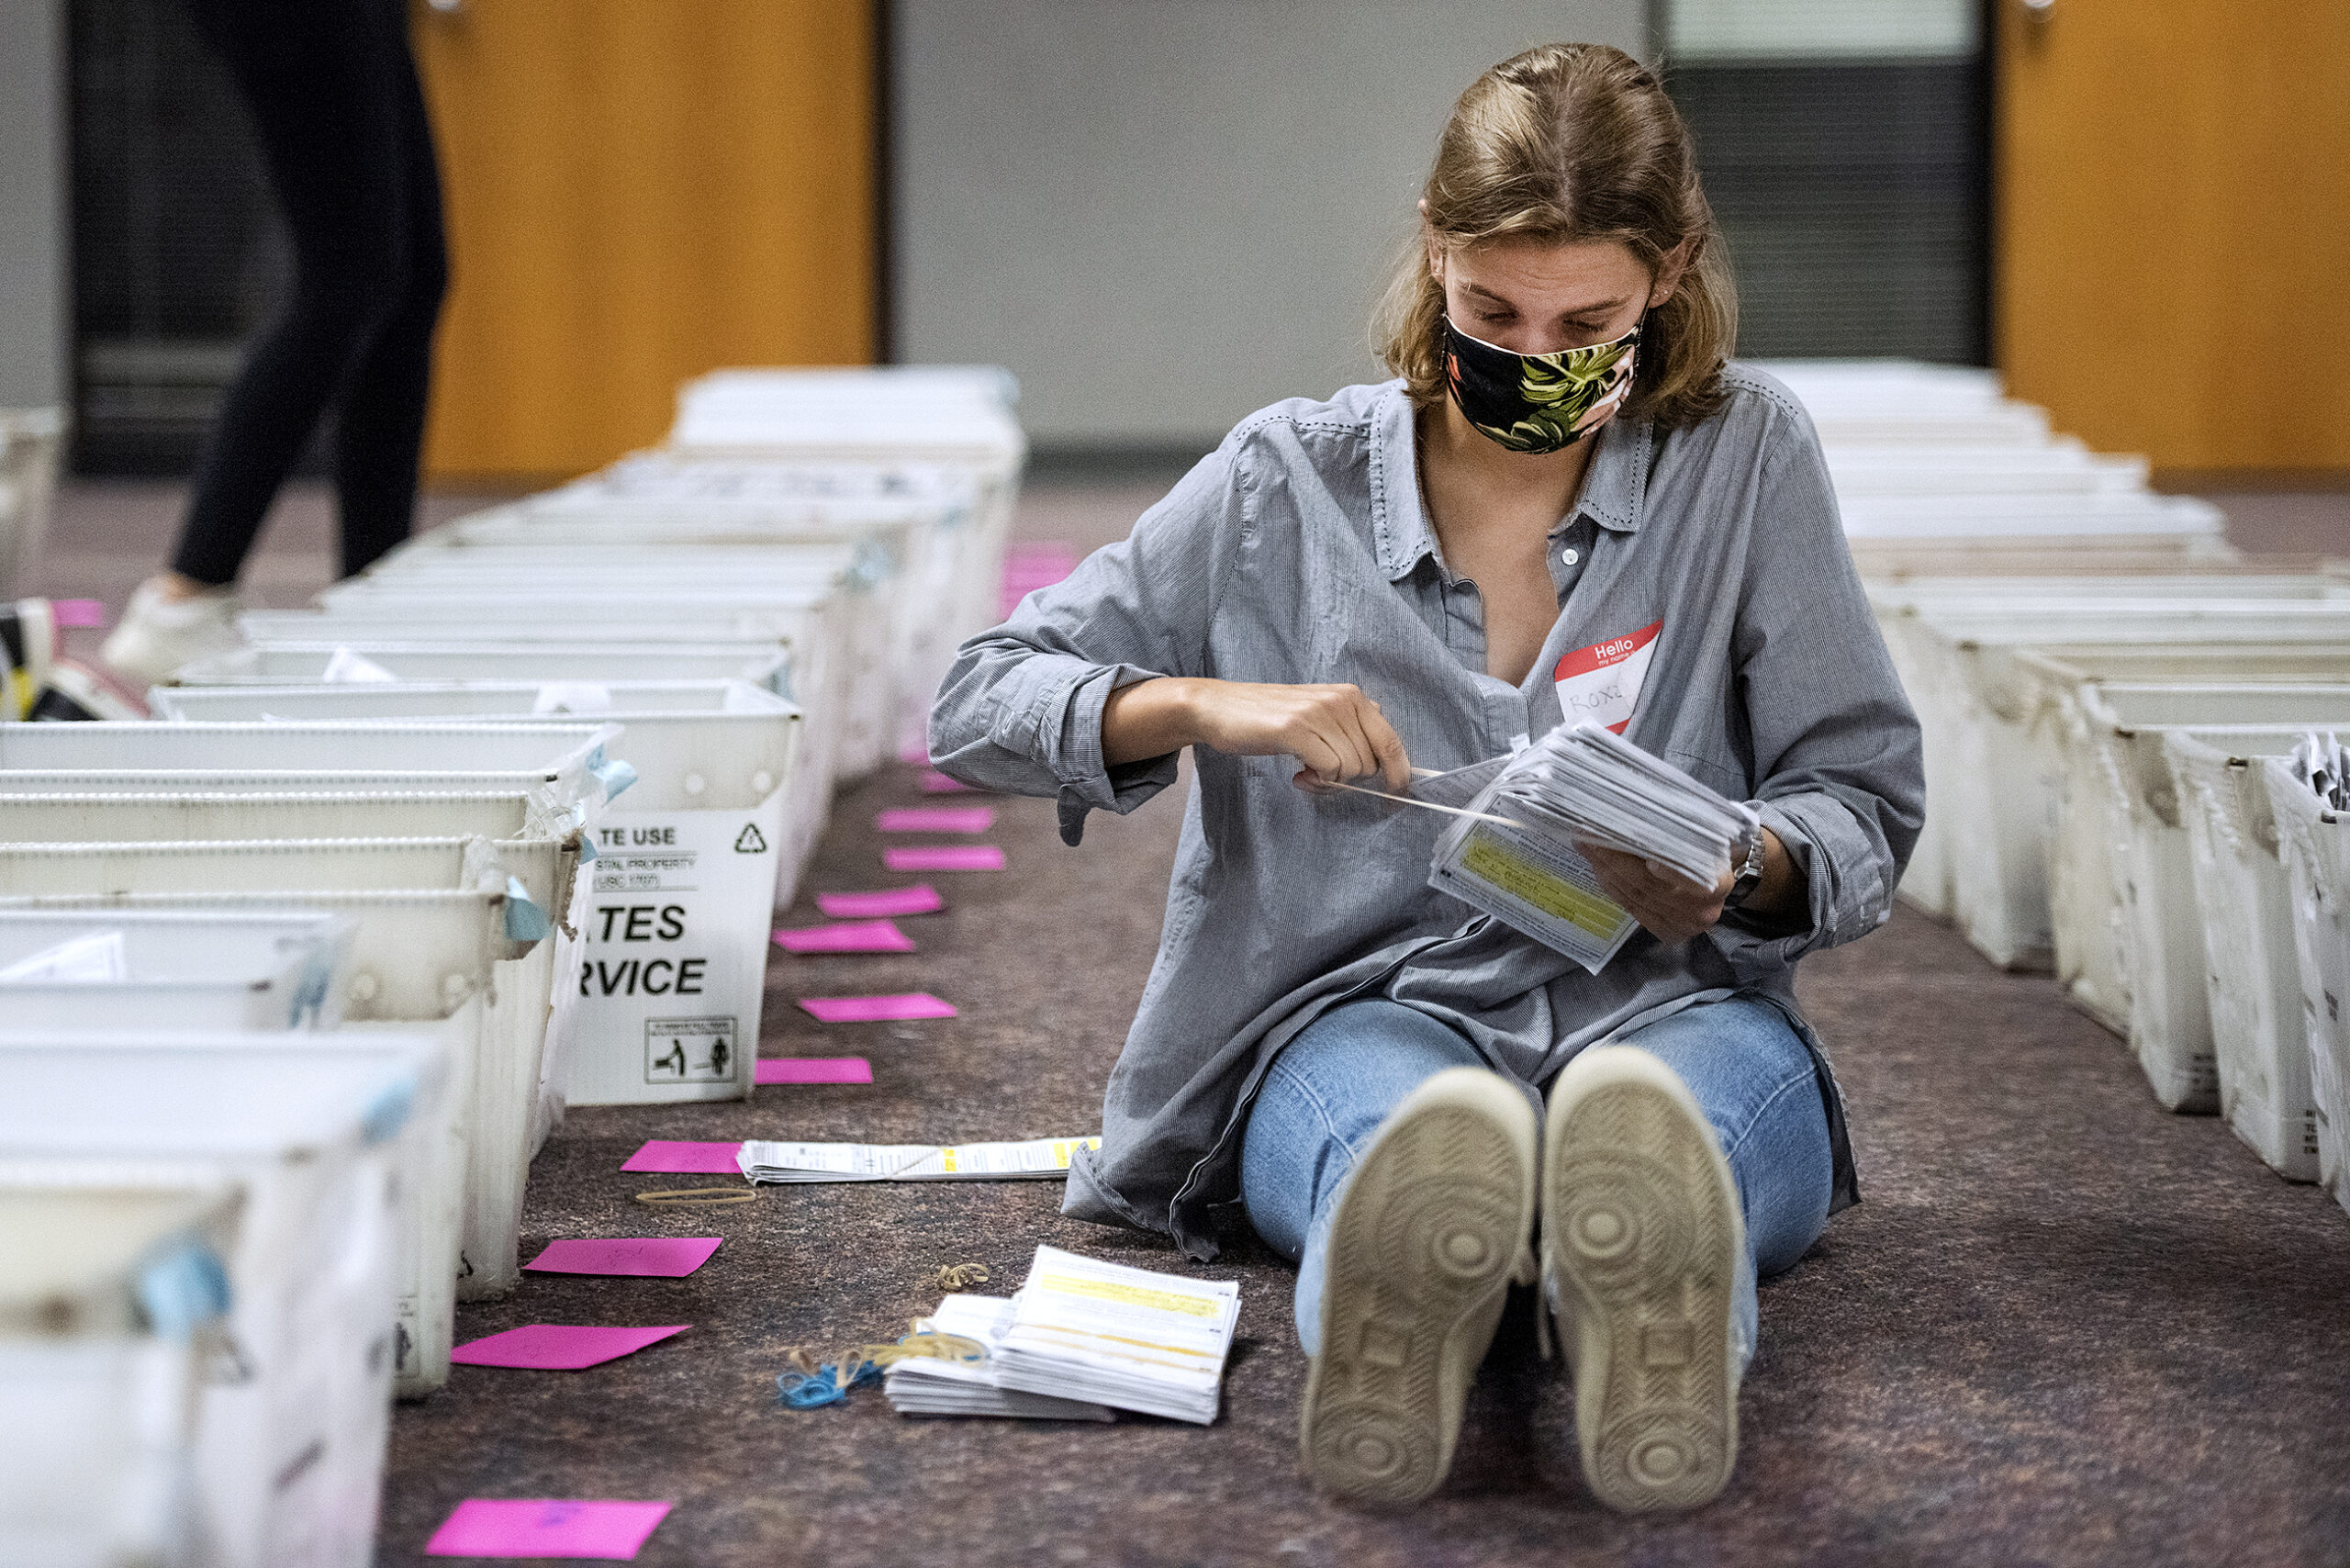 a woman sits on the floor next to rows of bins holding a large stack of ballots